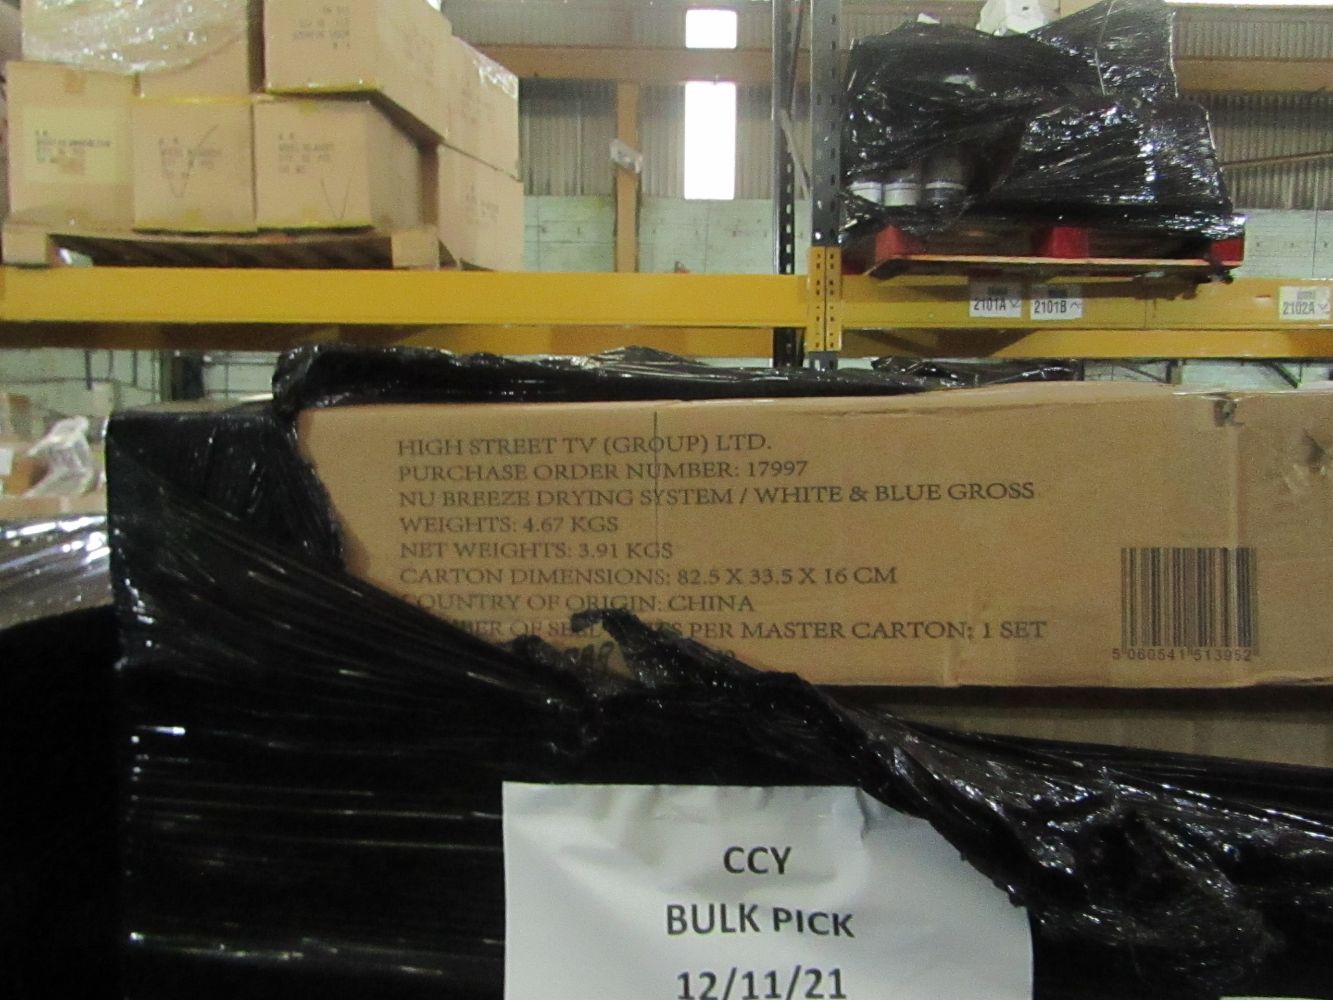 NEW LOTS ADDED!!!Pallets of Electrical stock and other retail items